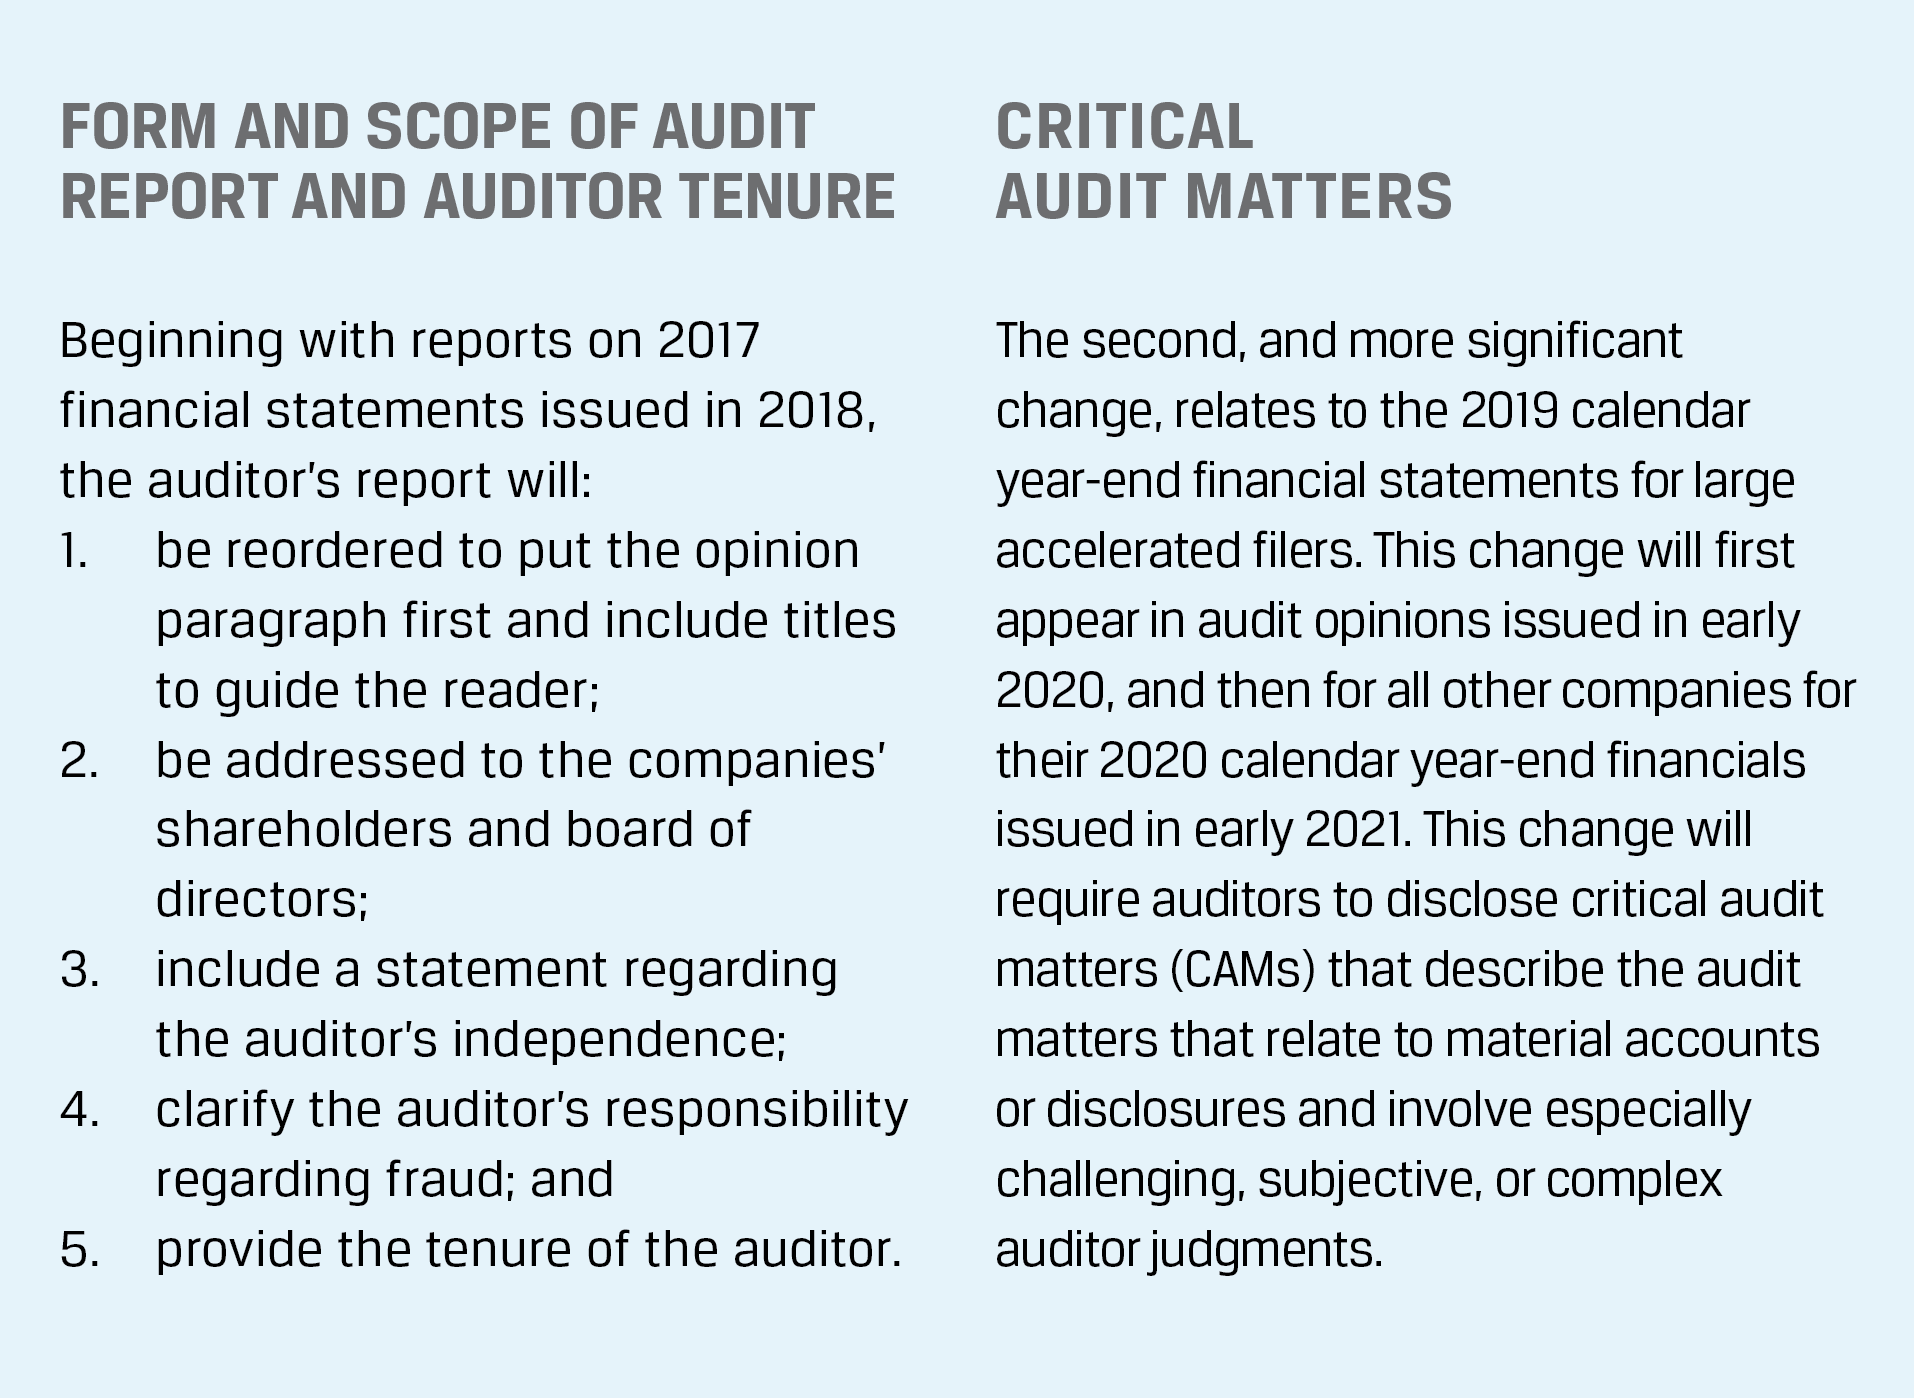 Form and Scope of Audit Report and Auditor Tenure